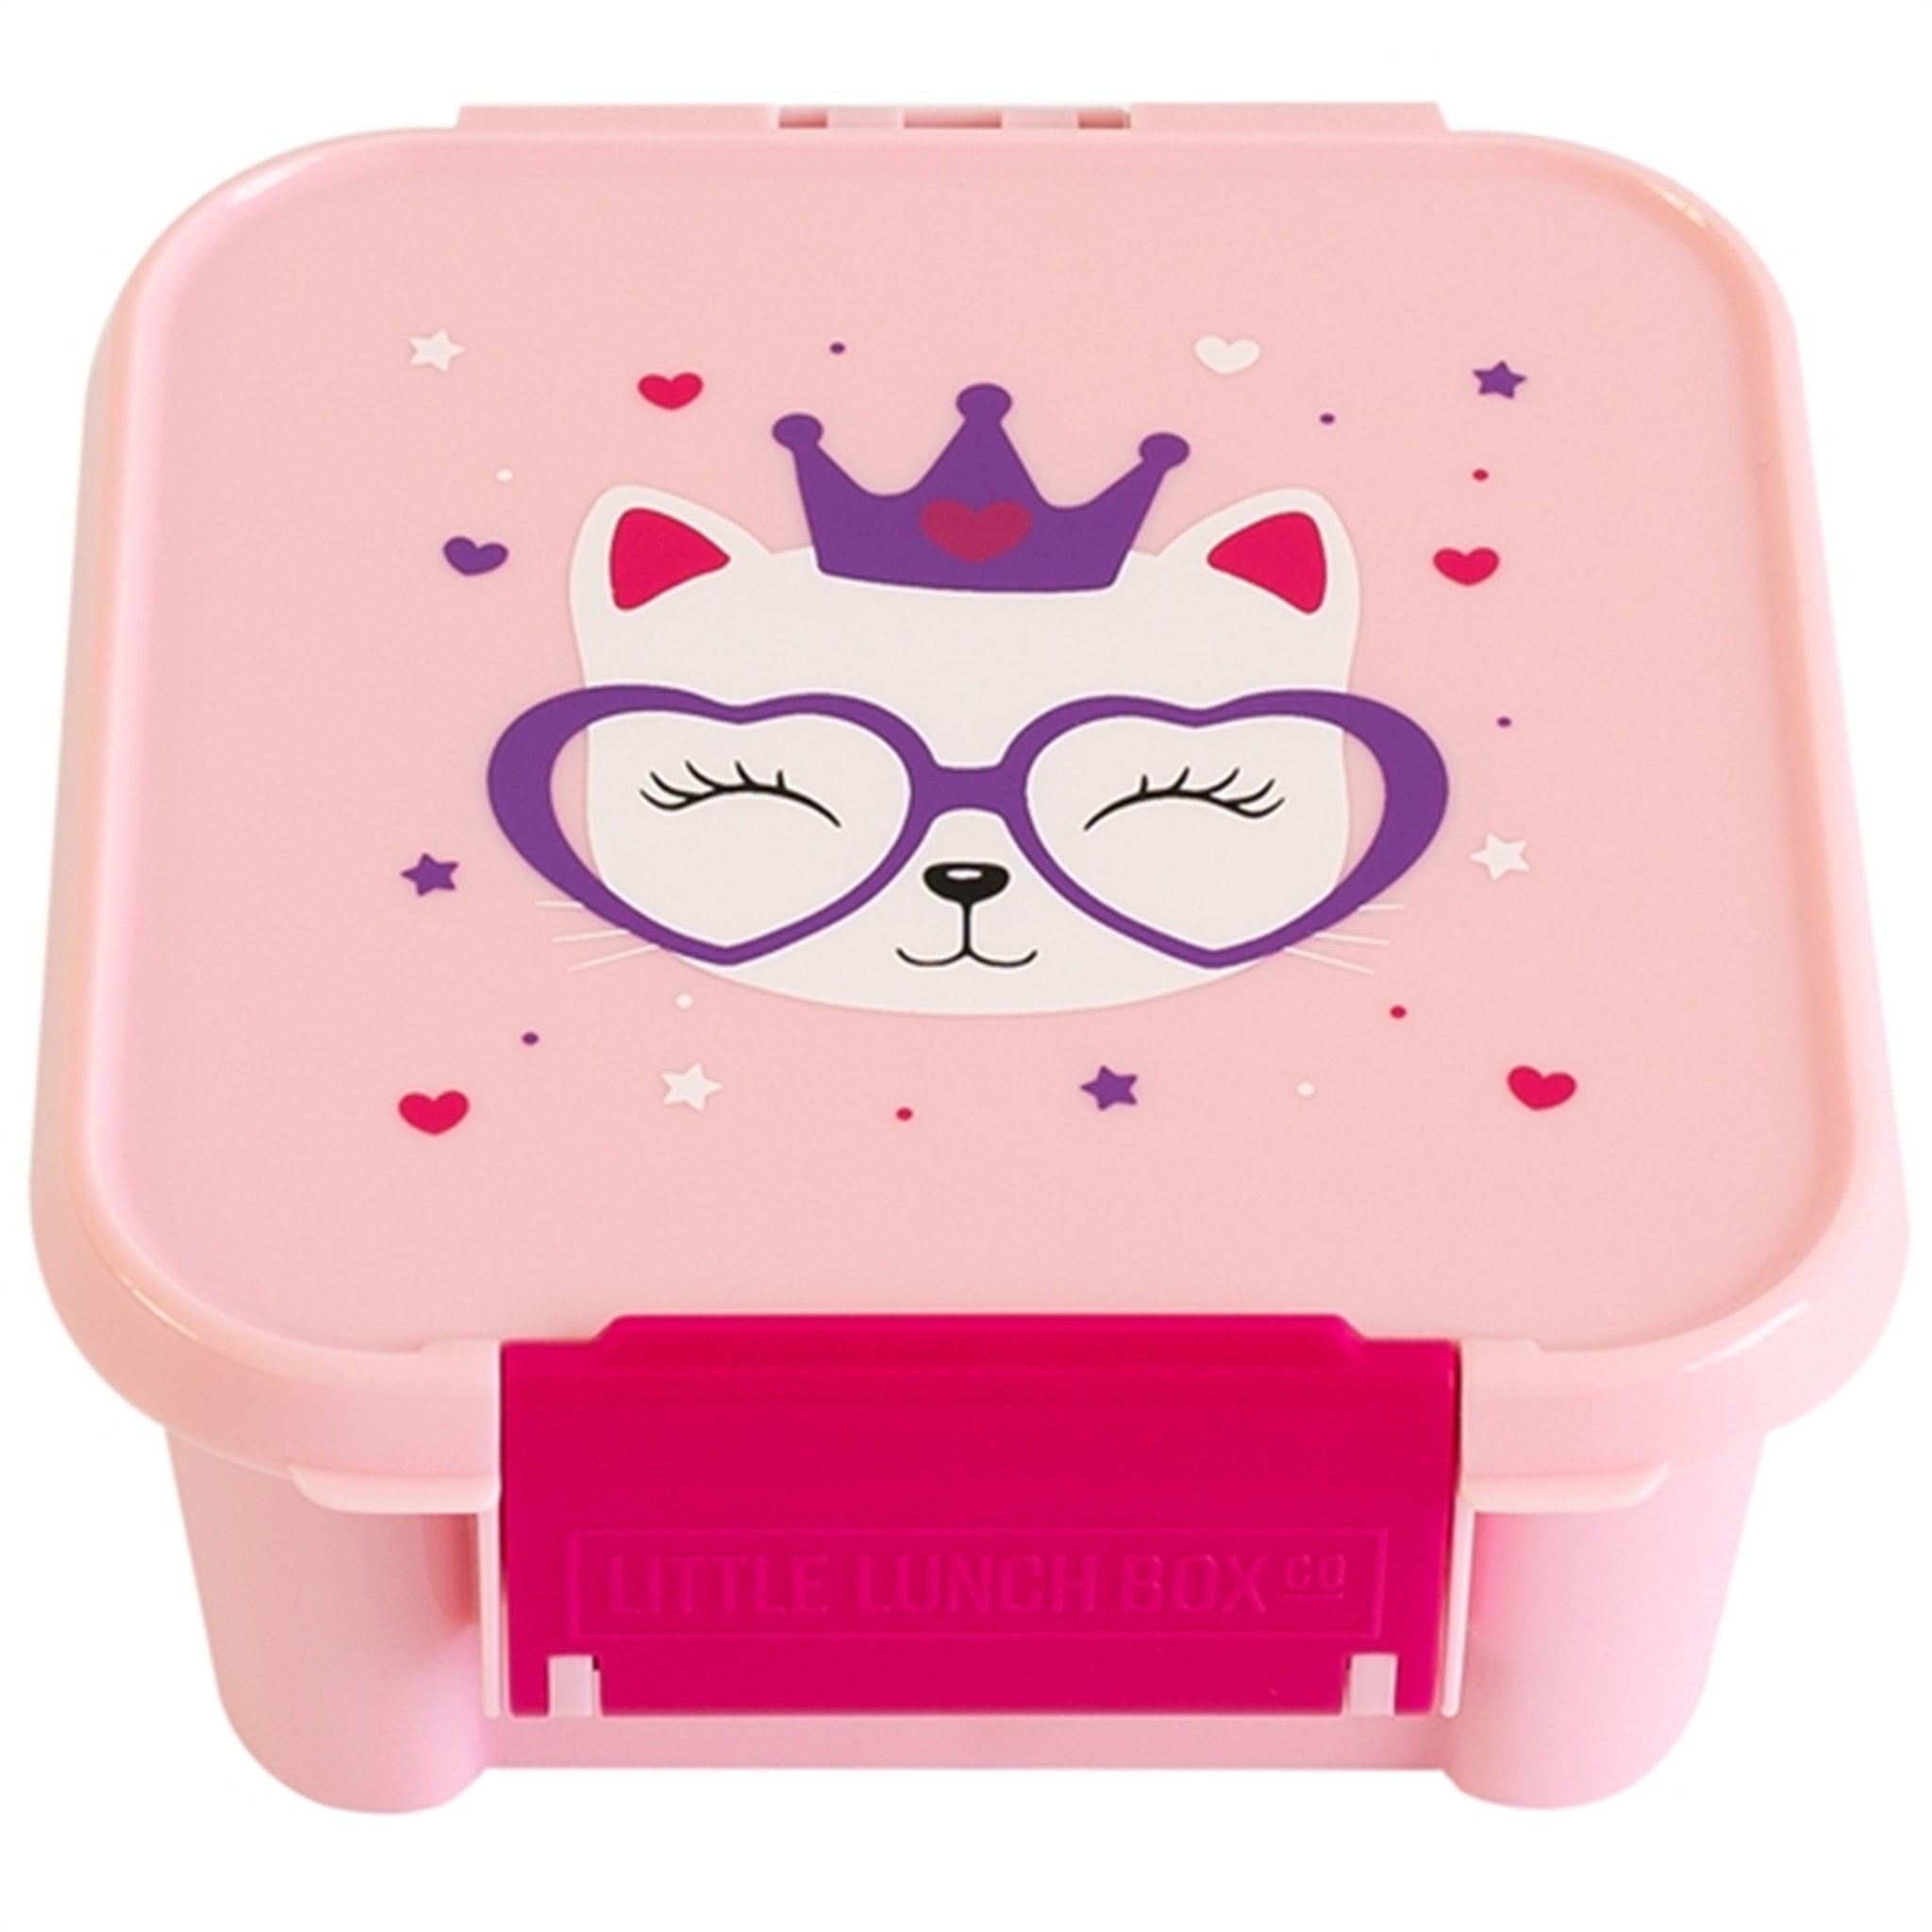 Little Lunch Box Co Bento 2 Lunch Box Kitty